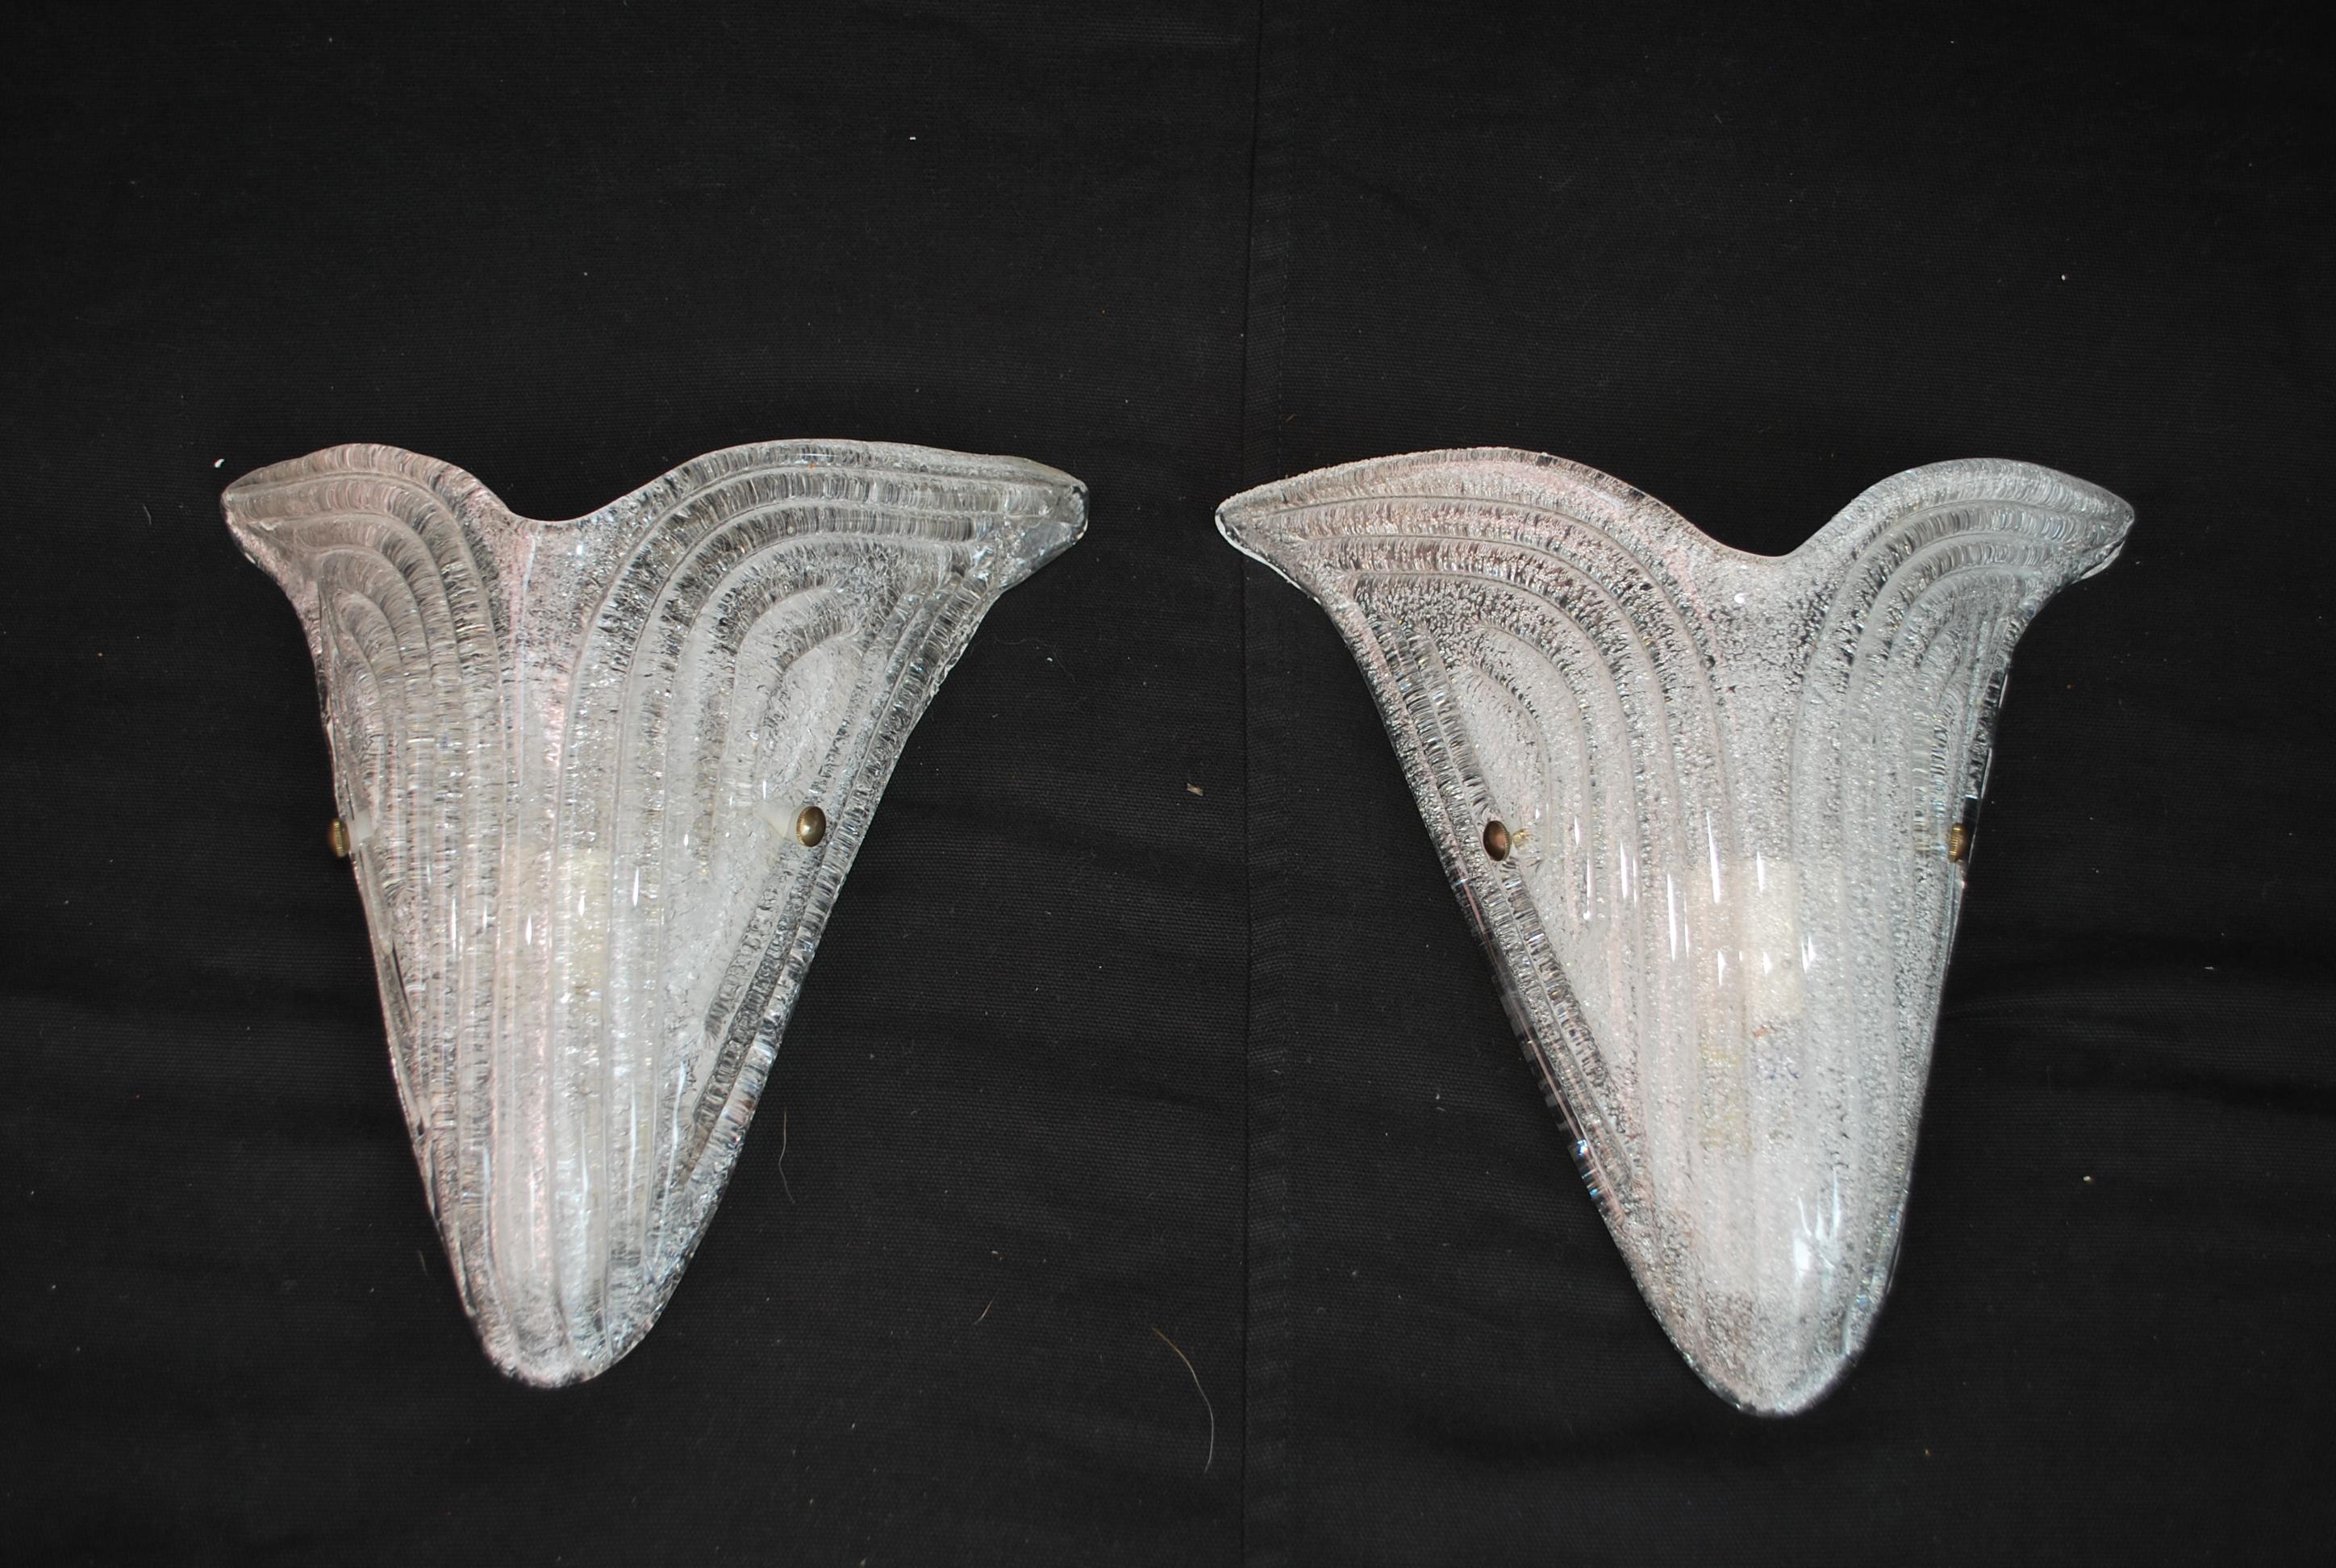 A beautiful and sexy pair of Murano sconces, the details of the glass are amazing.